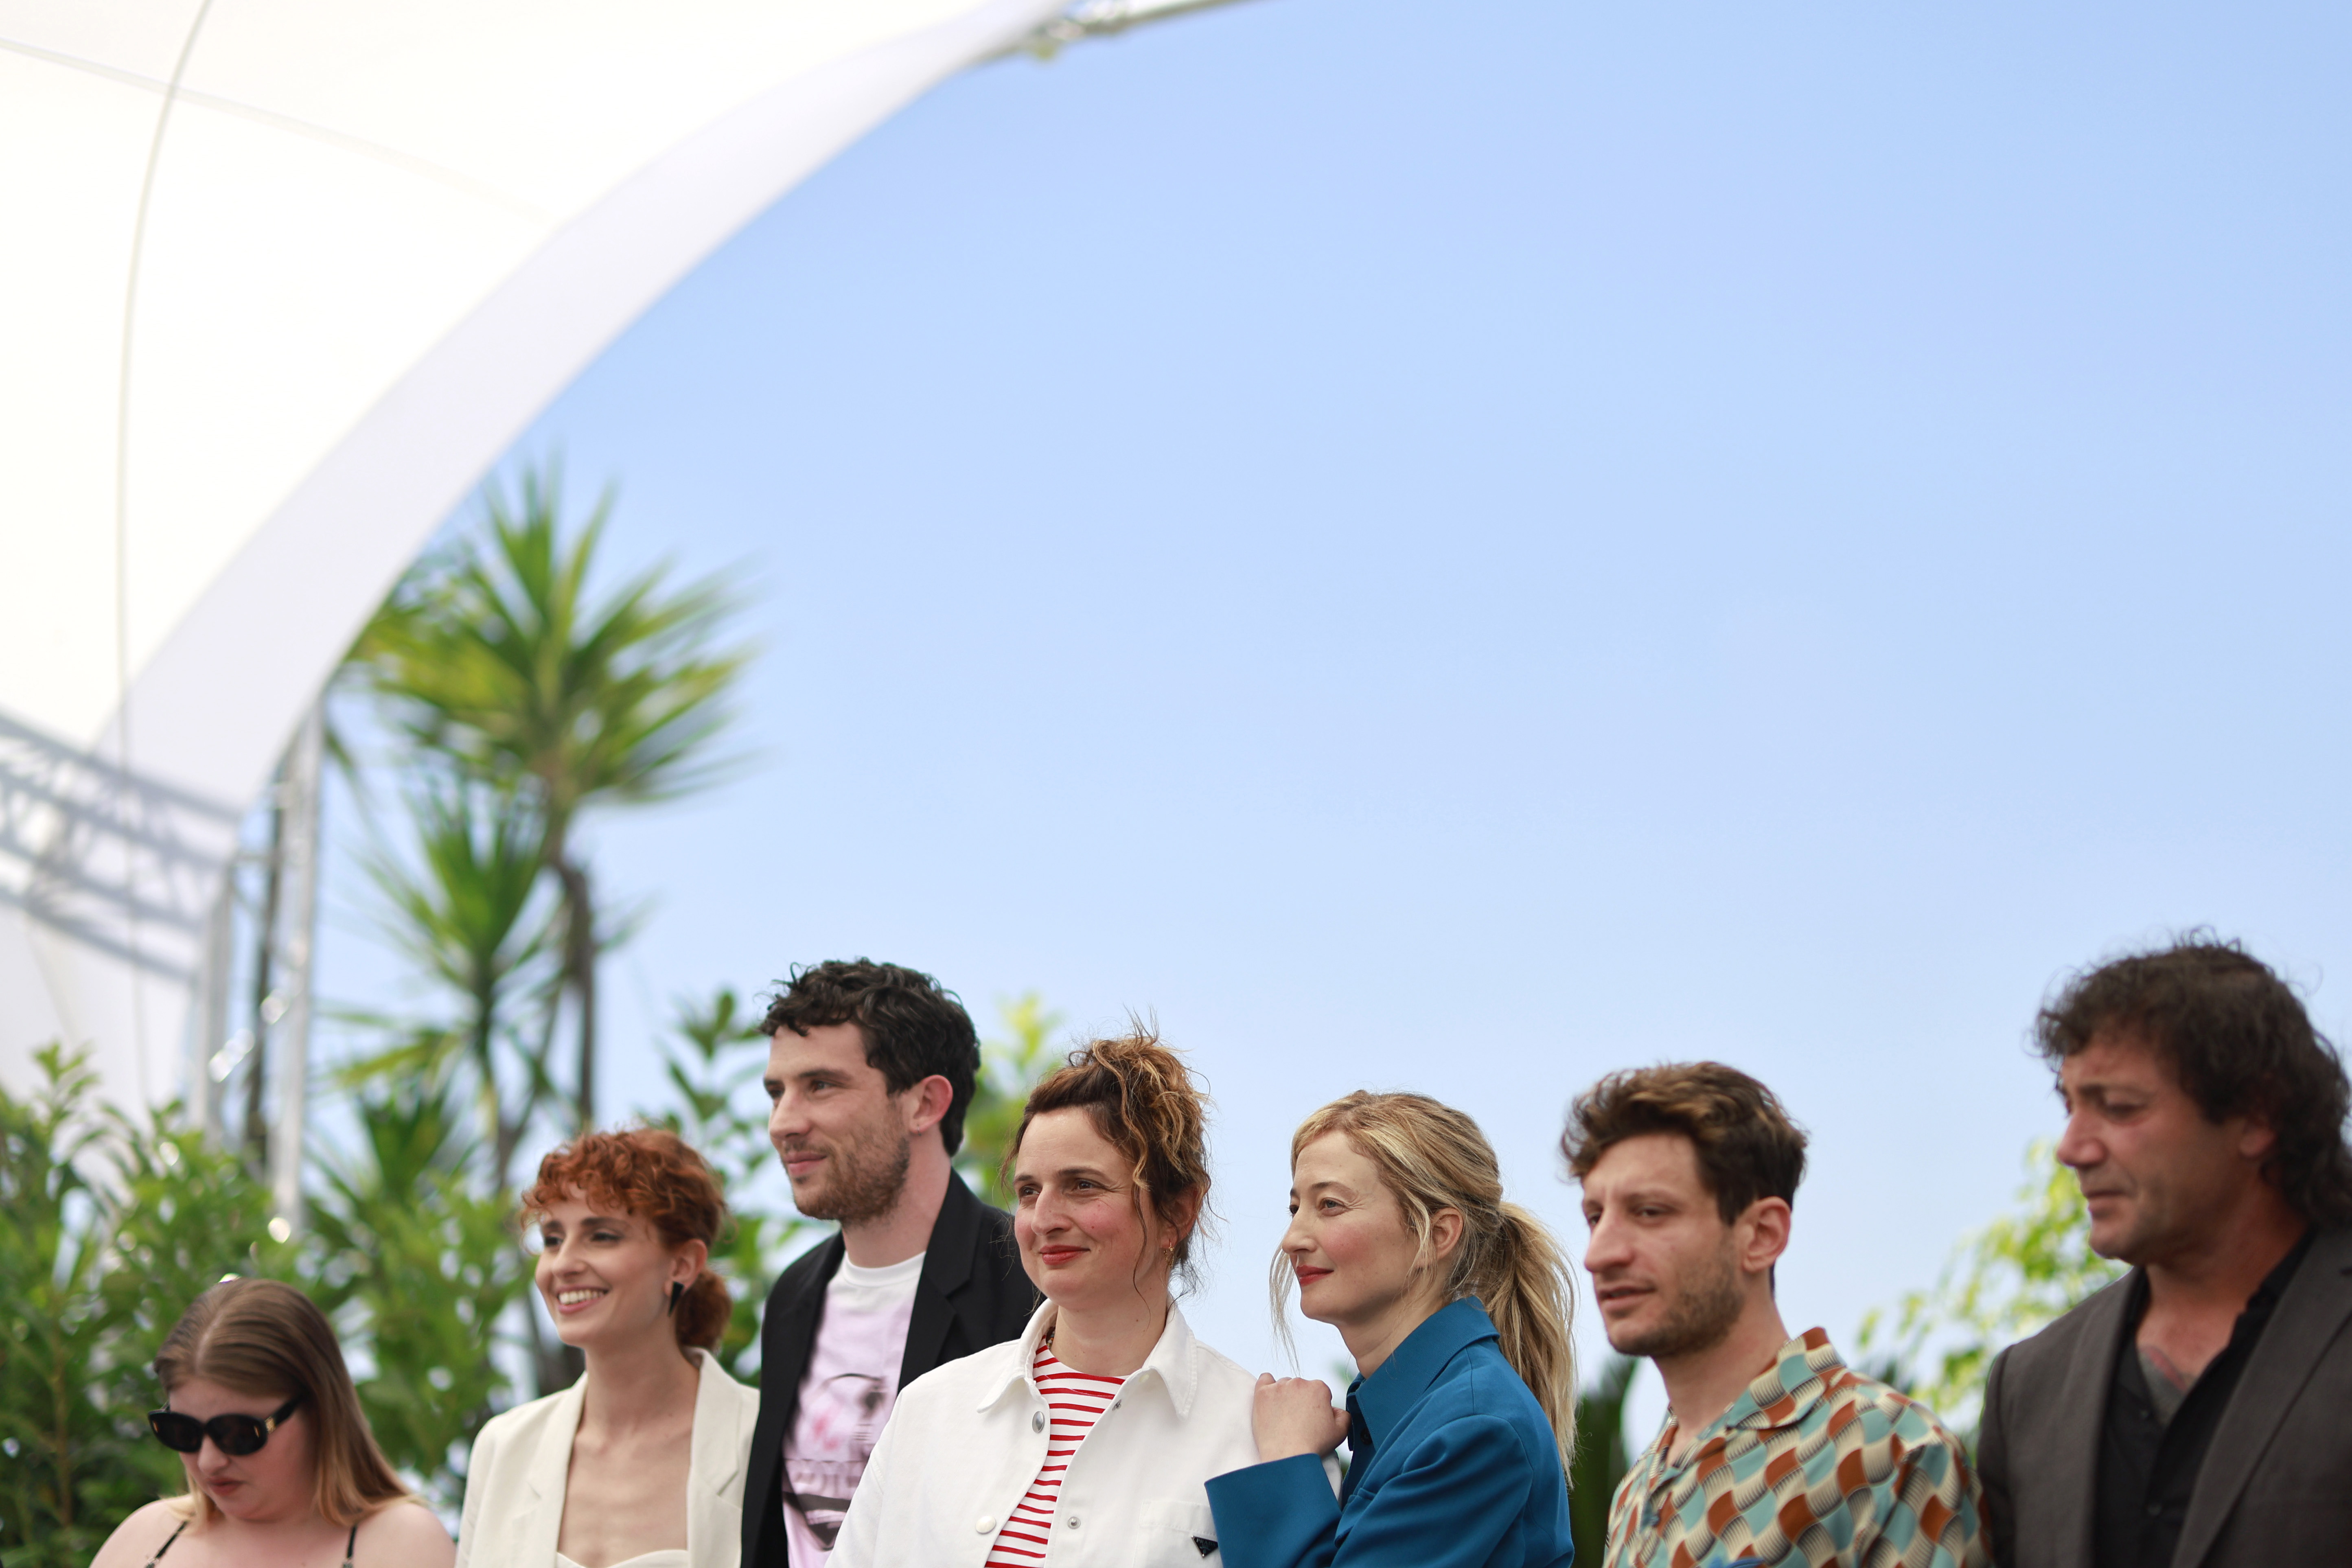 Cannes is ready for the Palme d’Or after two weeks of eclectic cinema